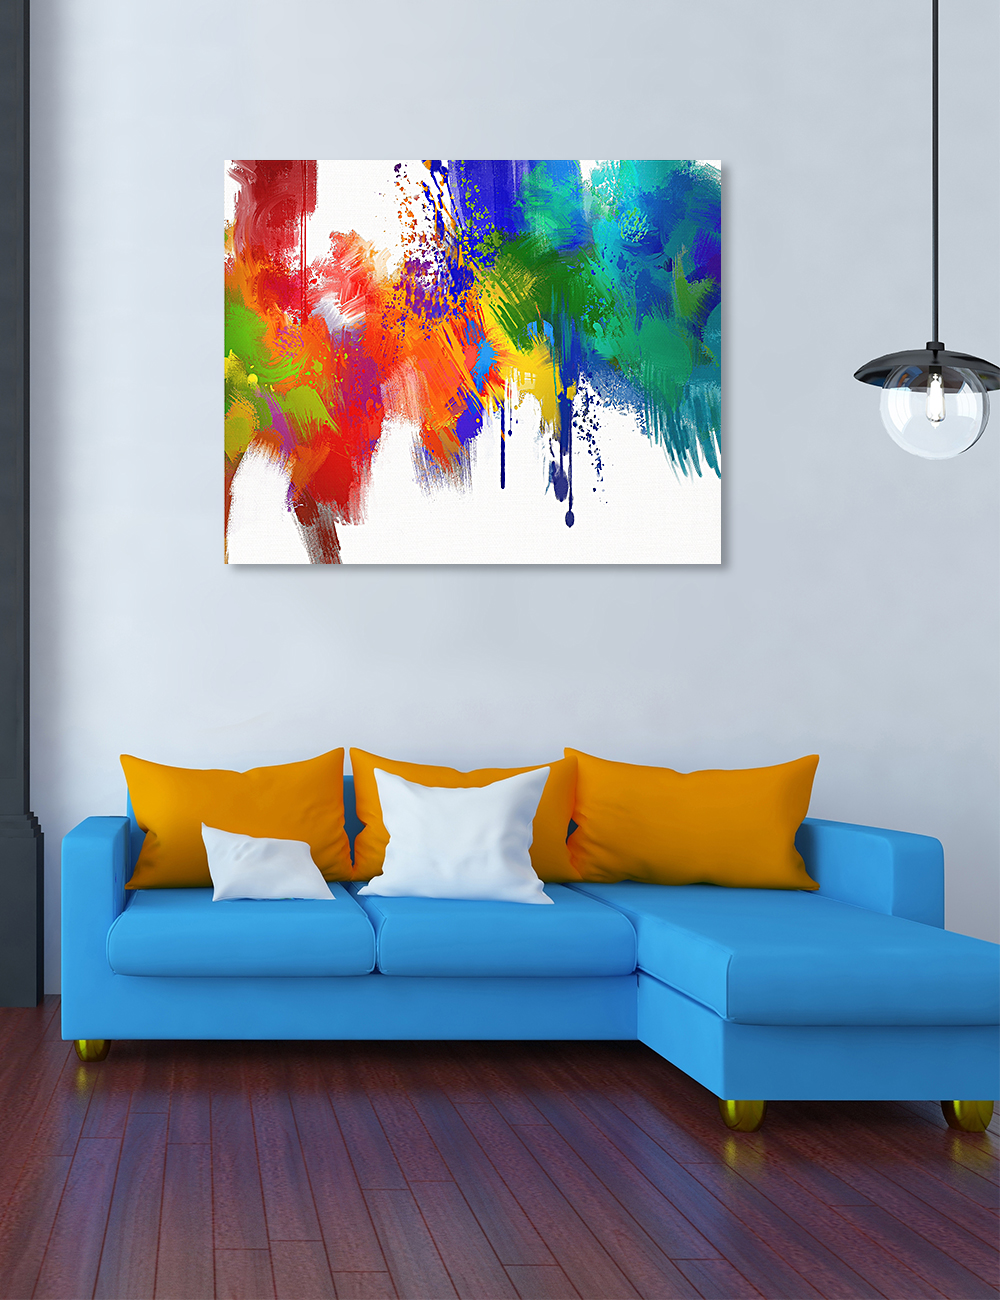 DECORARTS Colorful paint Abstract Wall Art, Oversize Canvas Art Giclee  Prints on Acid Free Cotton Canvas for Home Decor W 40